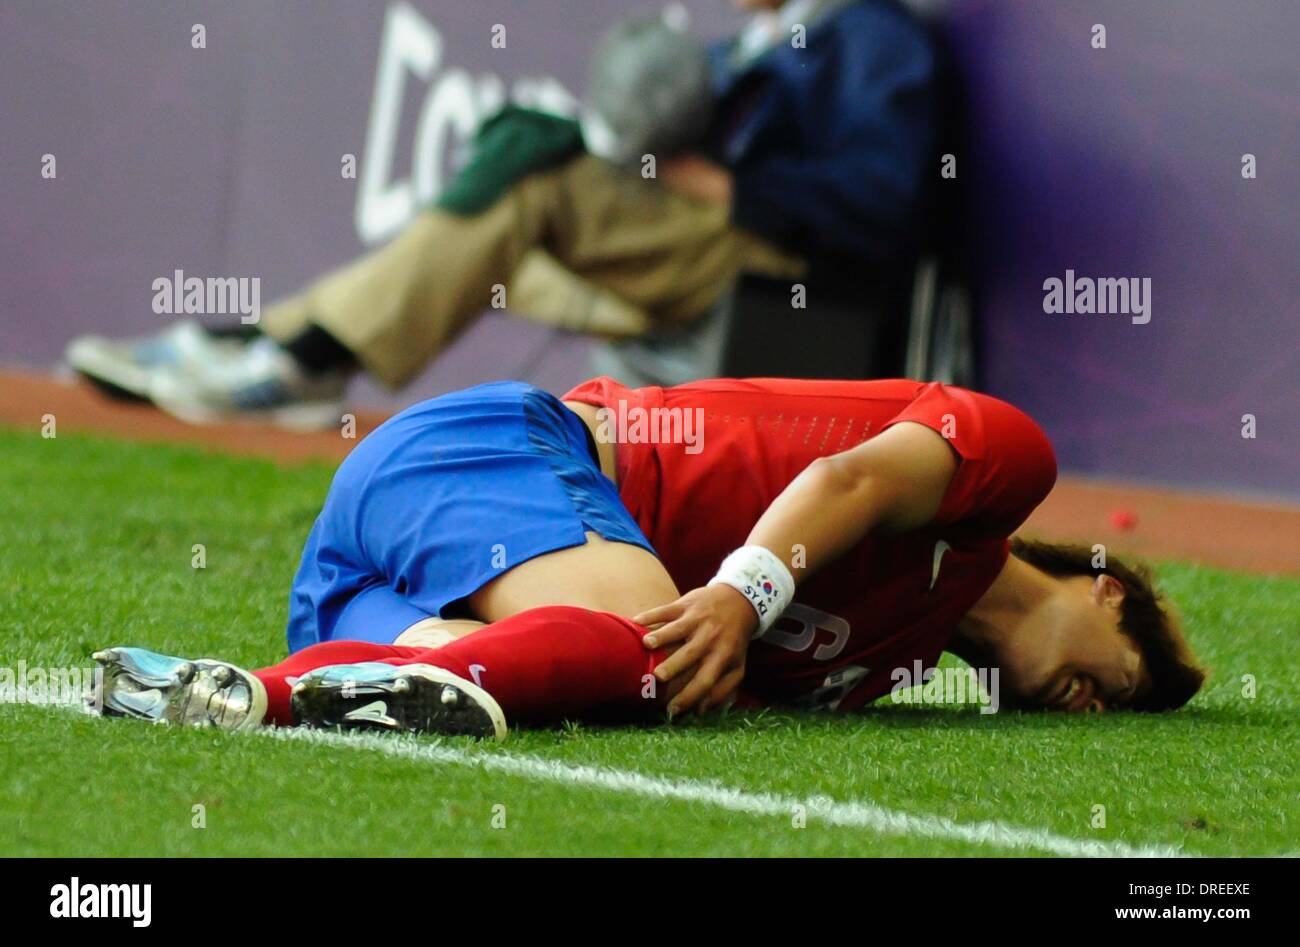 South Korea's Ki Sungyueng lies injured   The Olympic Football Men's Preliminary game between Korea and Switzerland held at the City of Coventry Stadium  Coventry, England - 29.07.12 Stock Photo